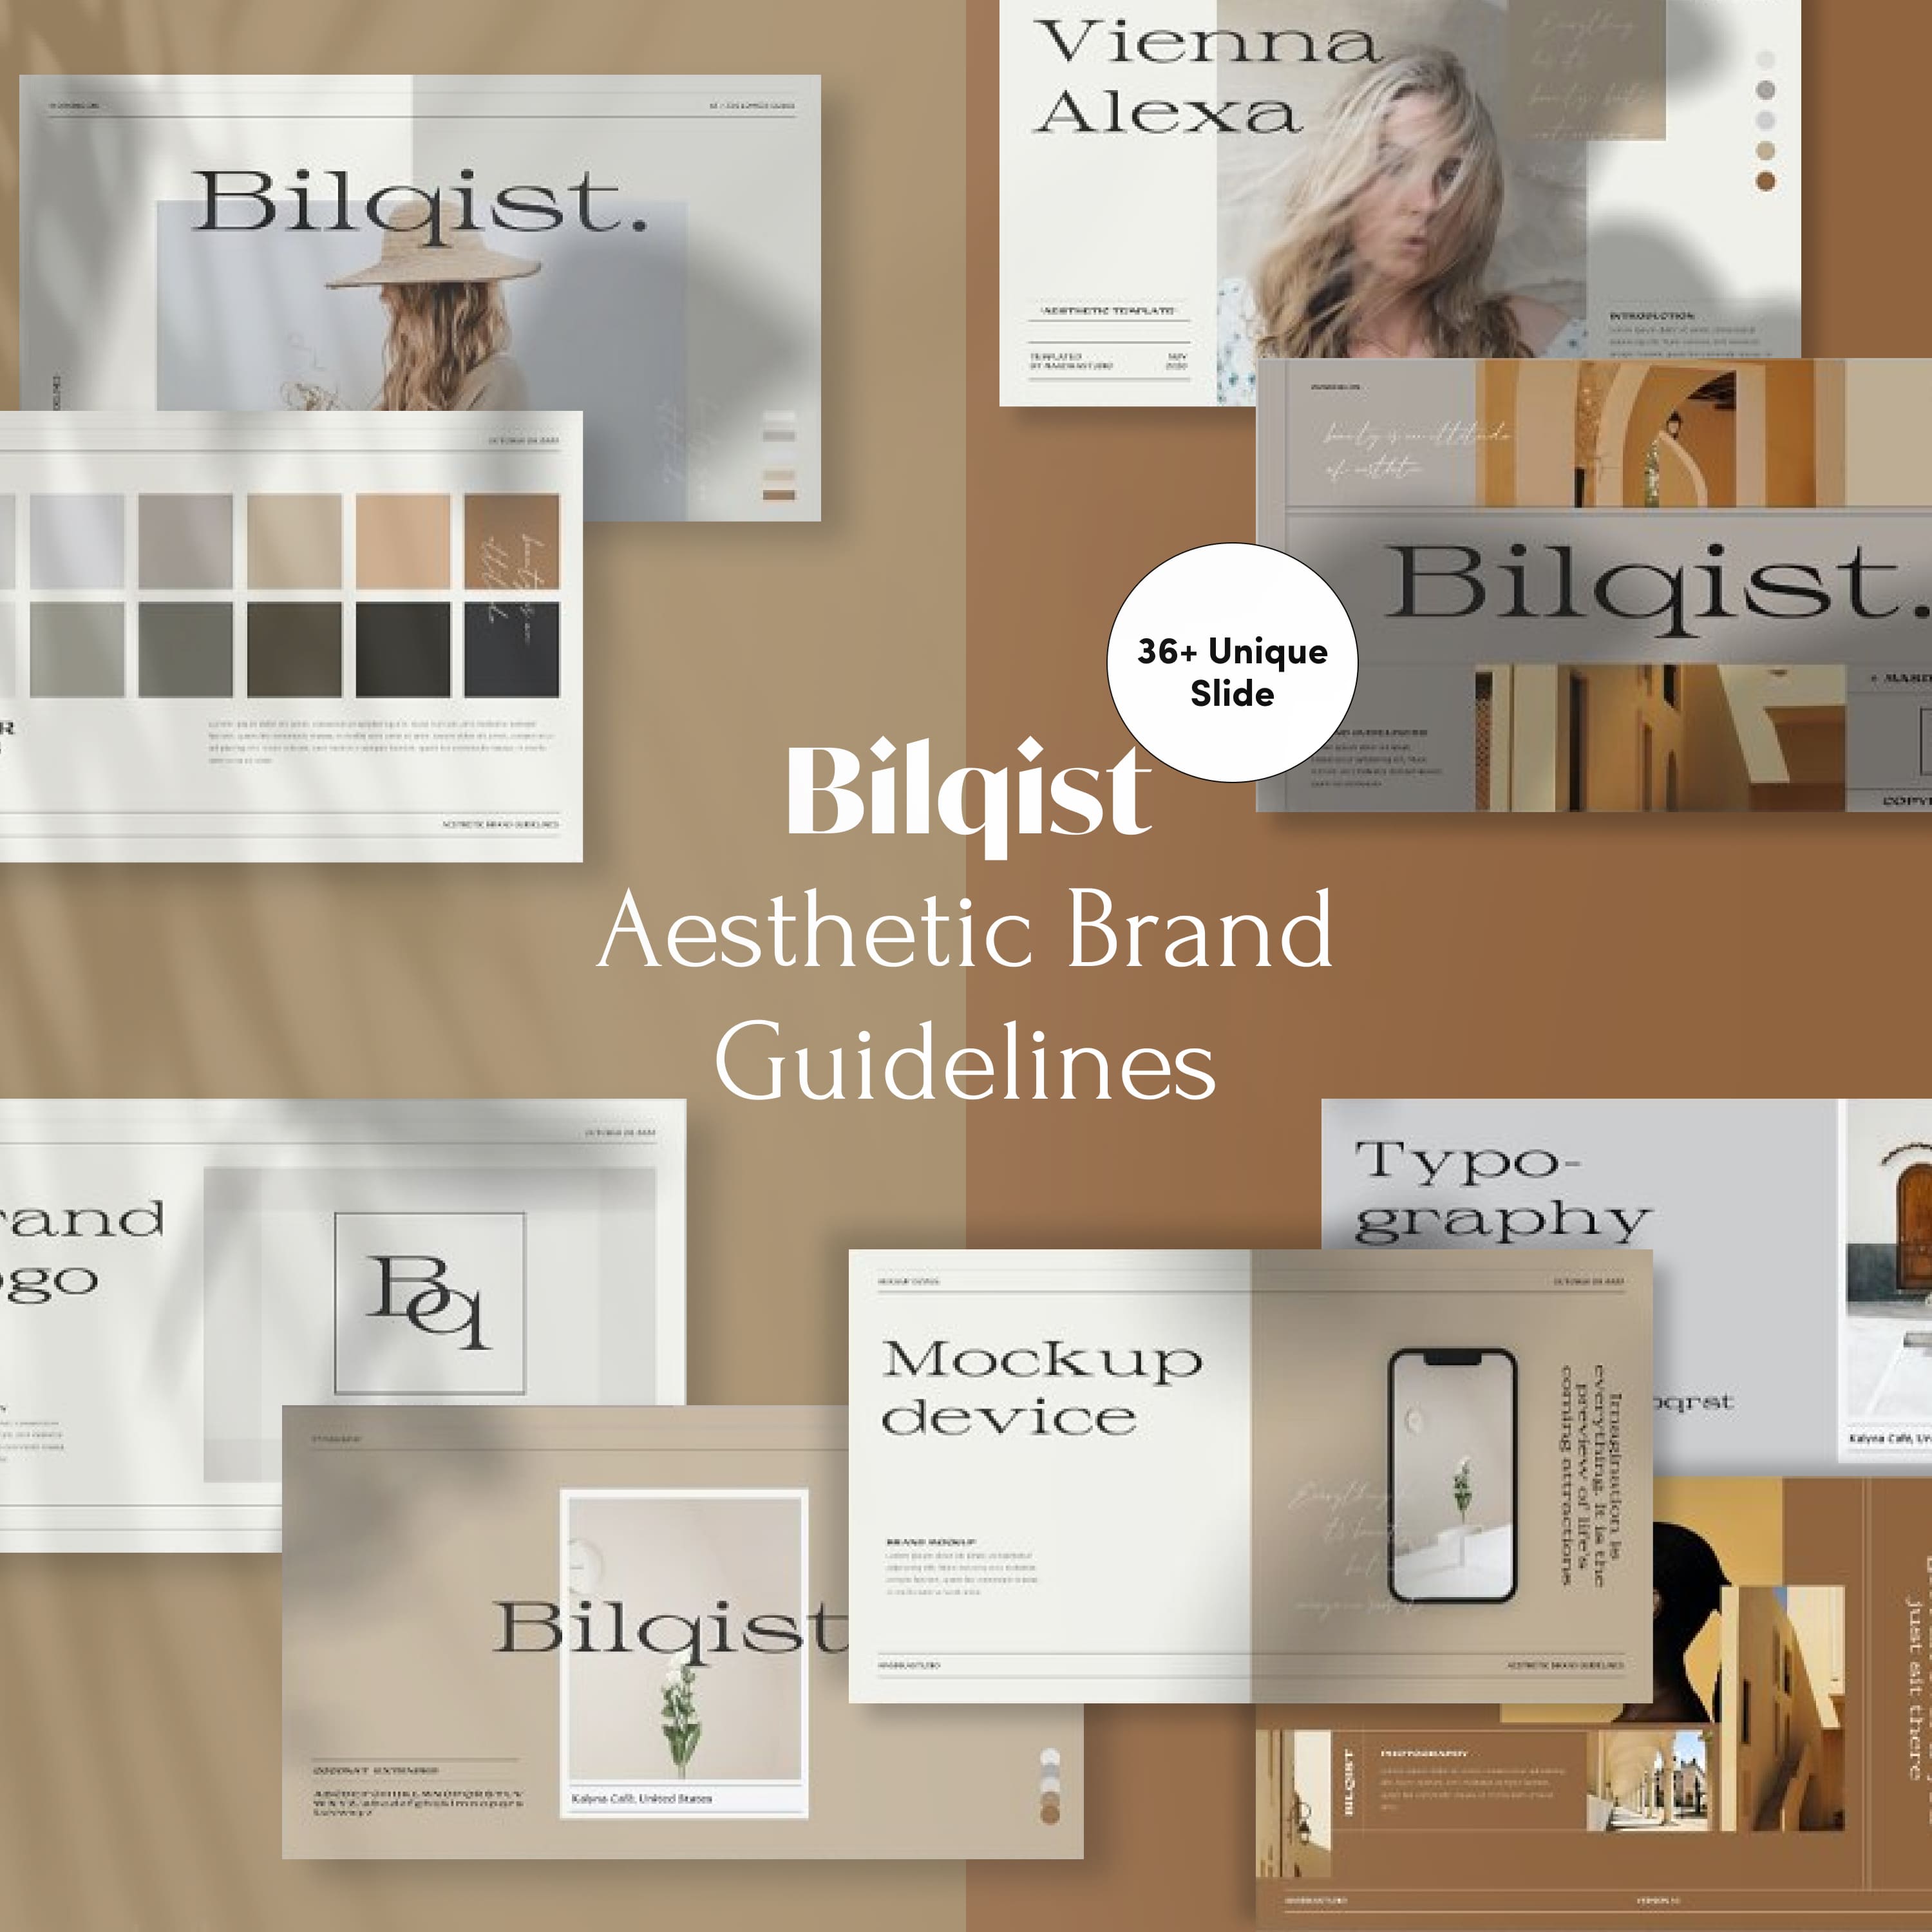 Bilqist - Aesthetic Brand Guidelines cover.